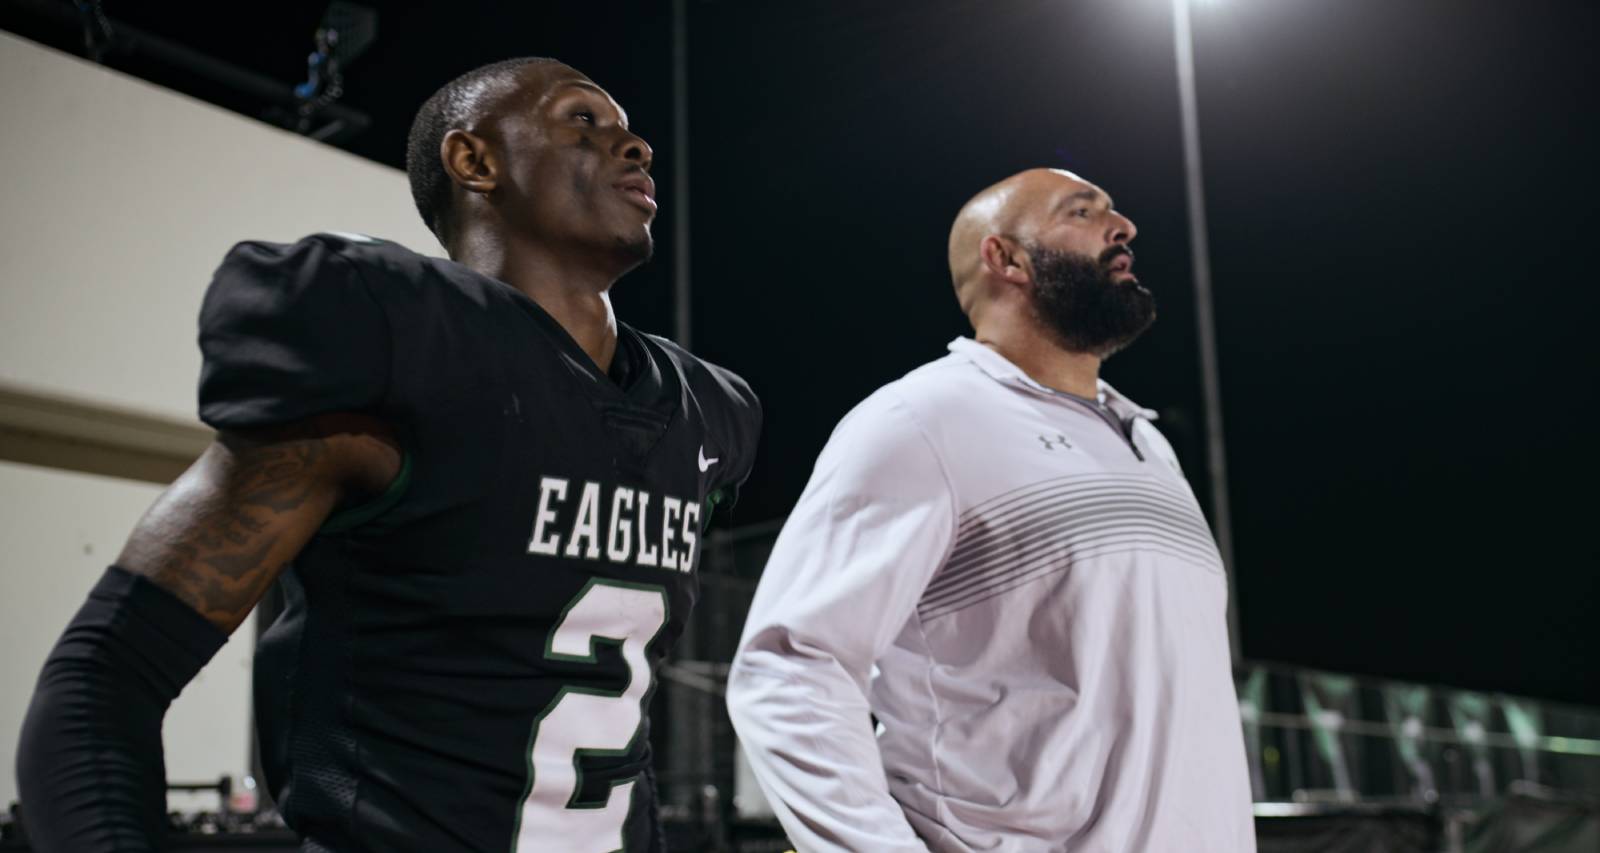 Rejzohn Wright Wiki: Facts About the Laney College Athlete from “Last Chance U”